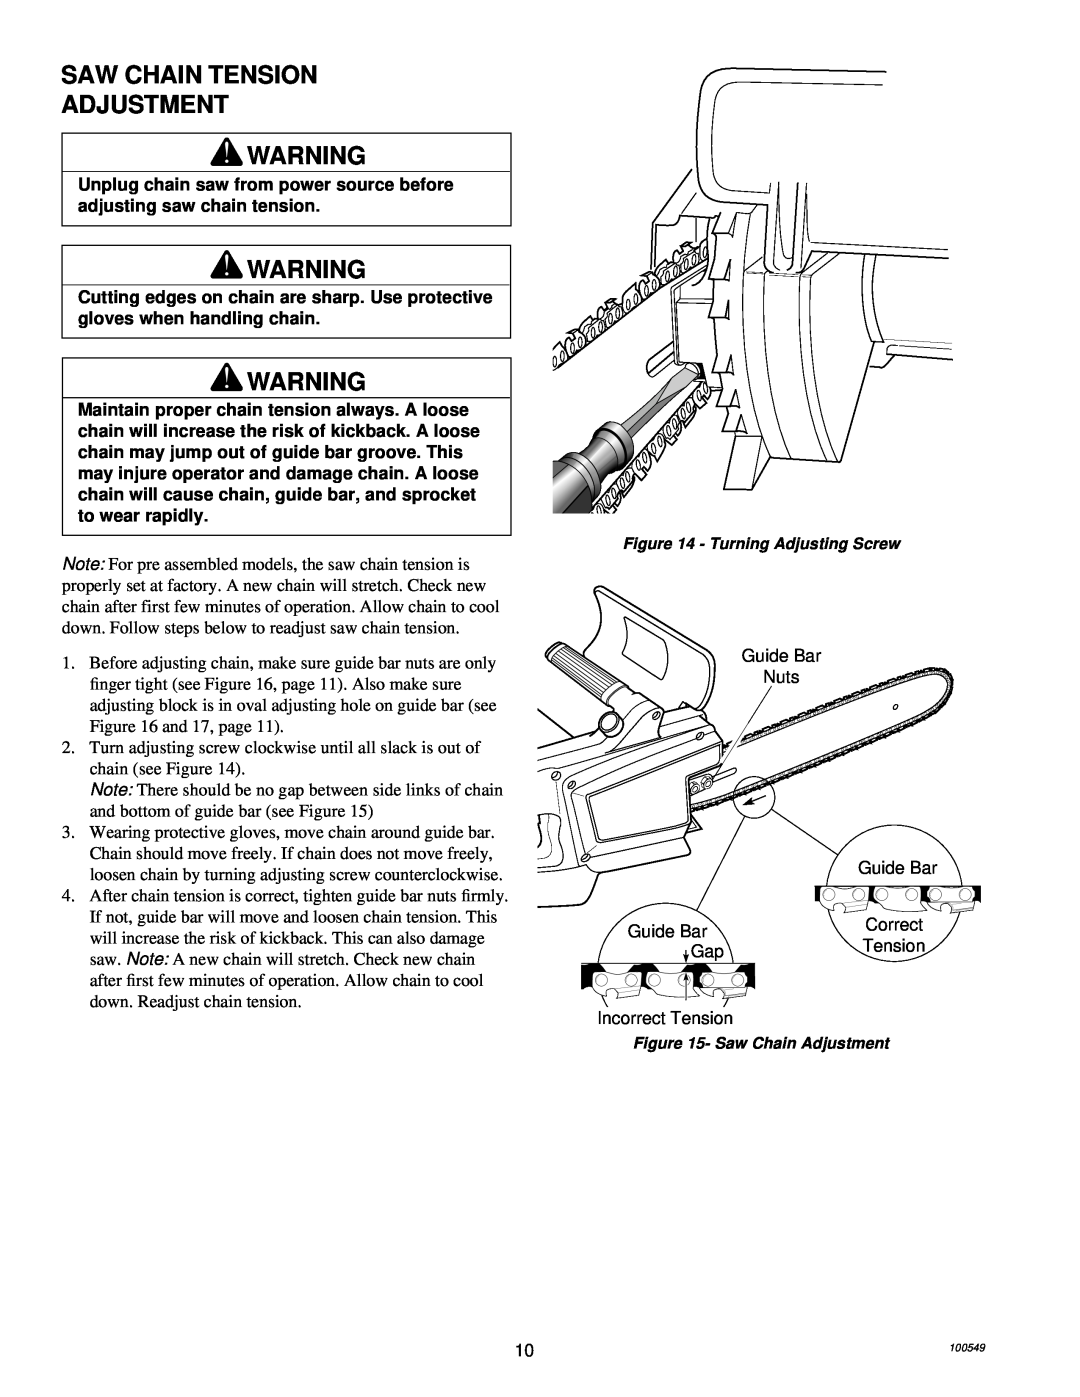 MasterCraft 100524-01, CS-120CB owner manual Saw Chain Tension Adjustment, Guide Bar Nuts, Correct, Incorrect Tension 